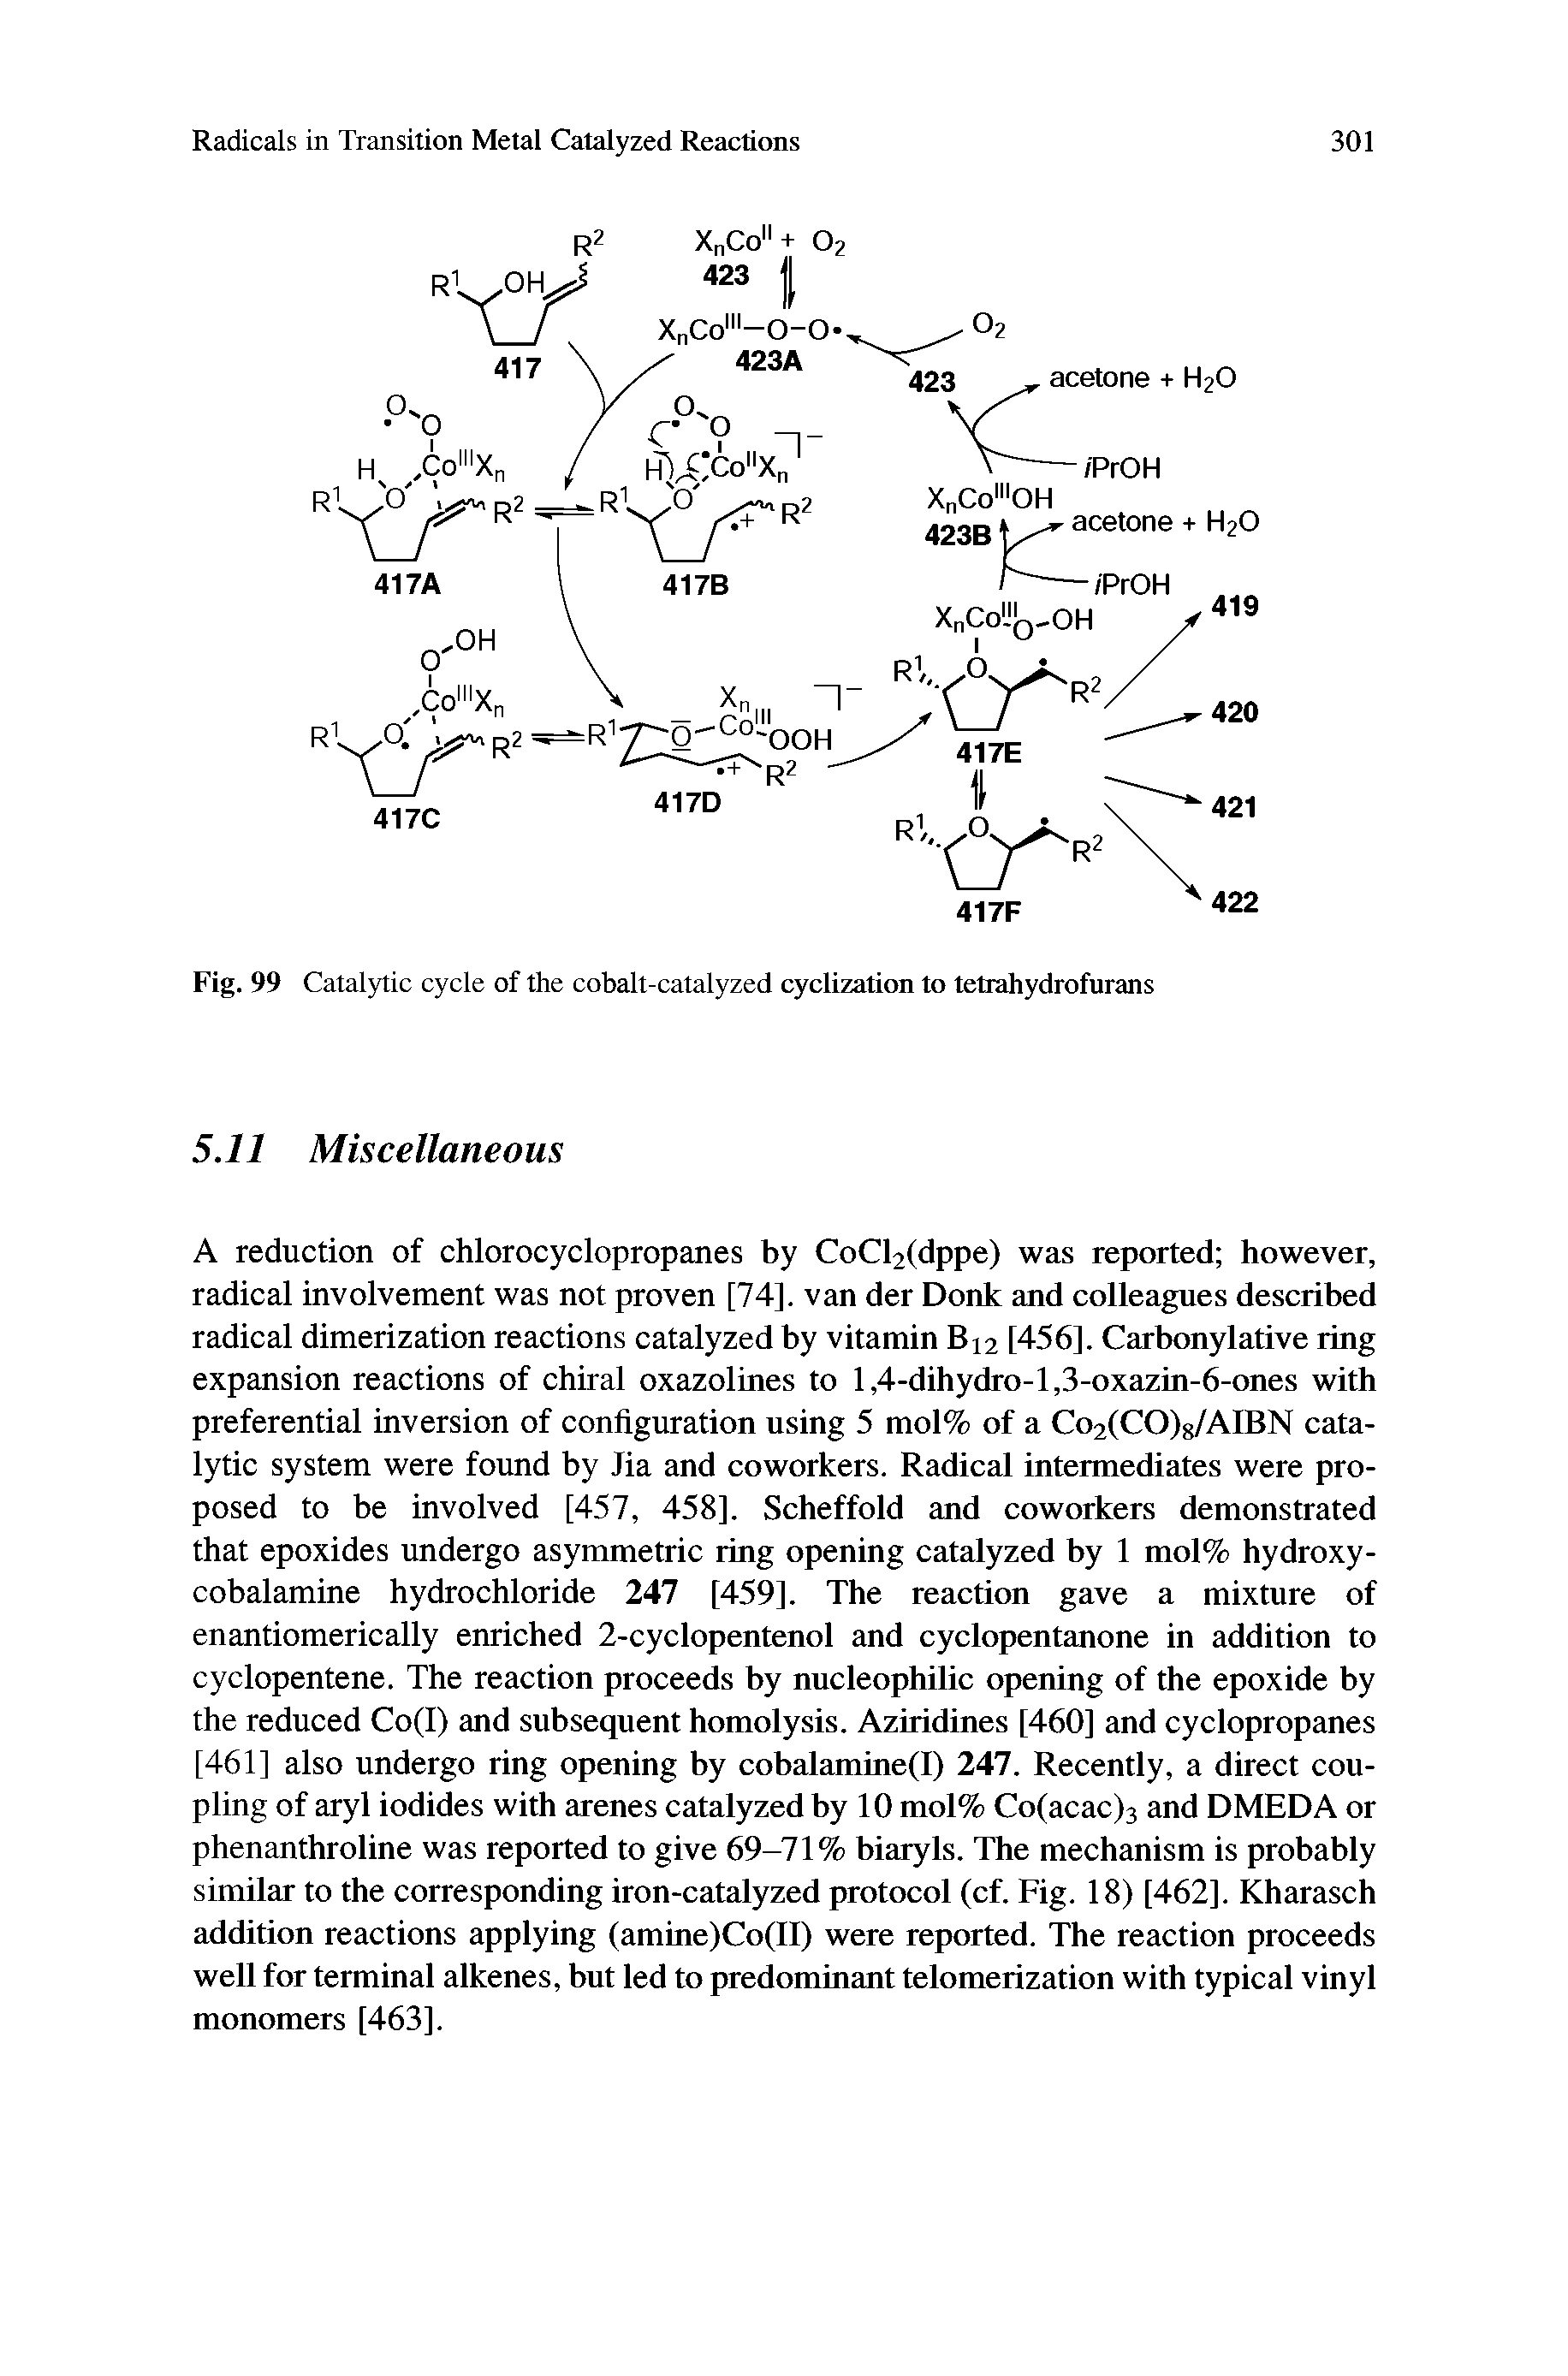 Fig. 99 Catalytic cycle of the cobalt-catalyzed cyclization to tetrahydrofurans...